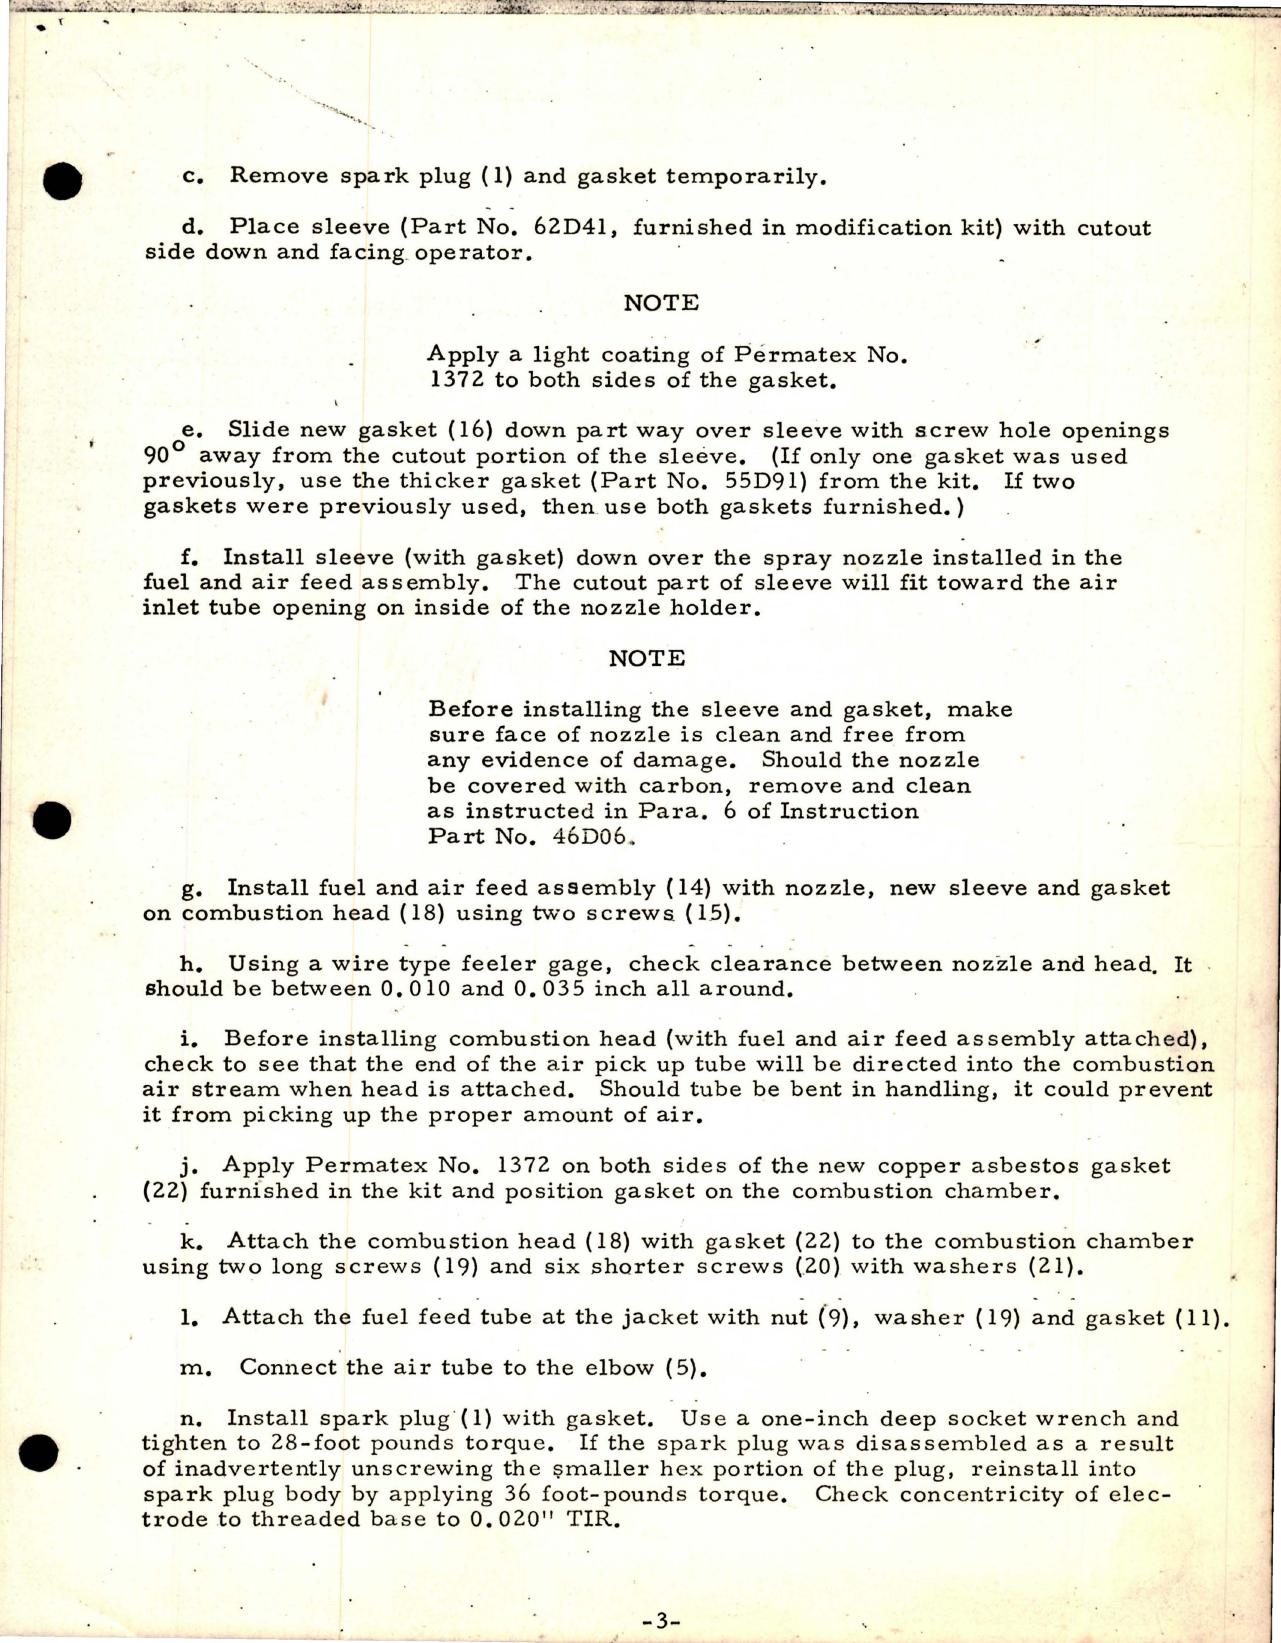 Sample page 5 from AirCorps Library document: Modification Instructions for Installation of Modification Kit -  Part 62D42